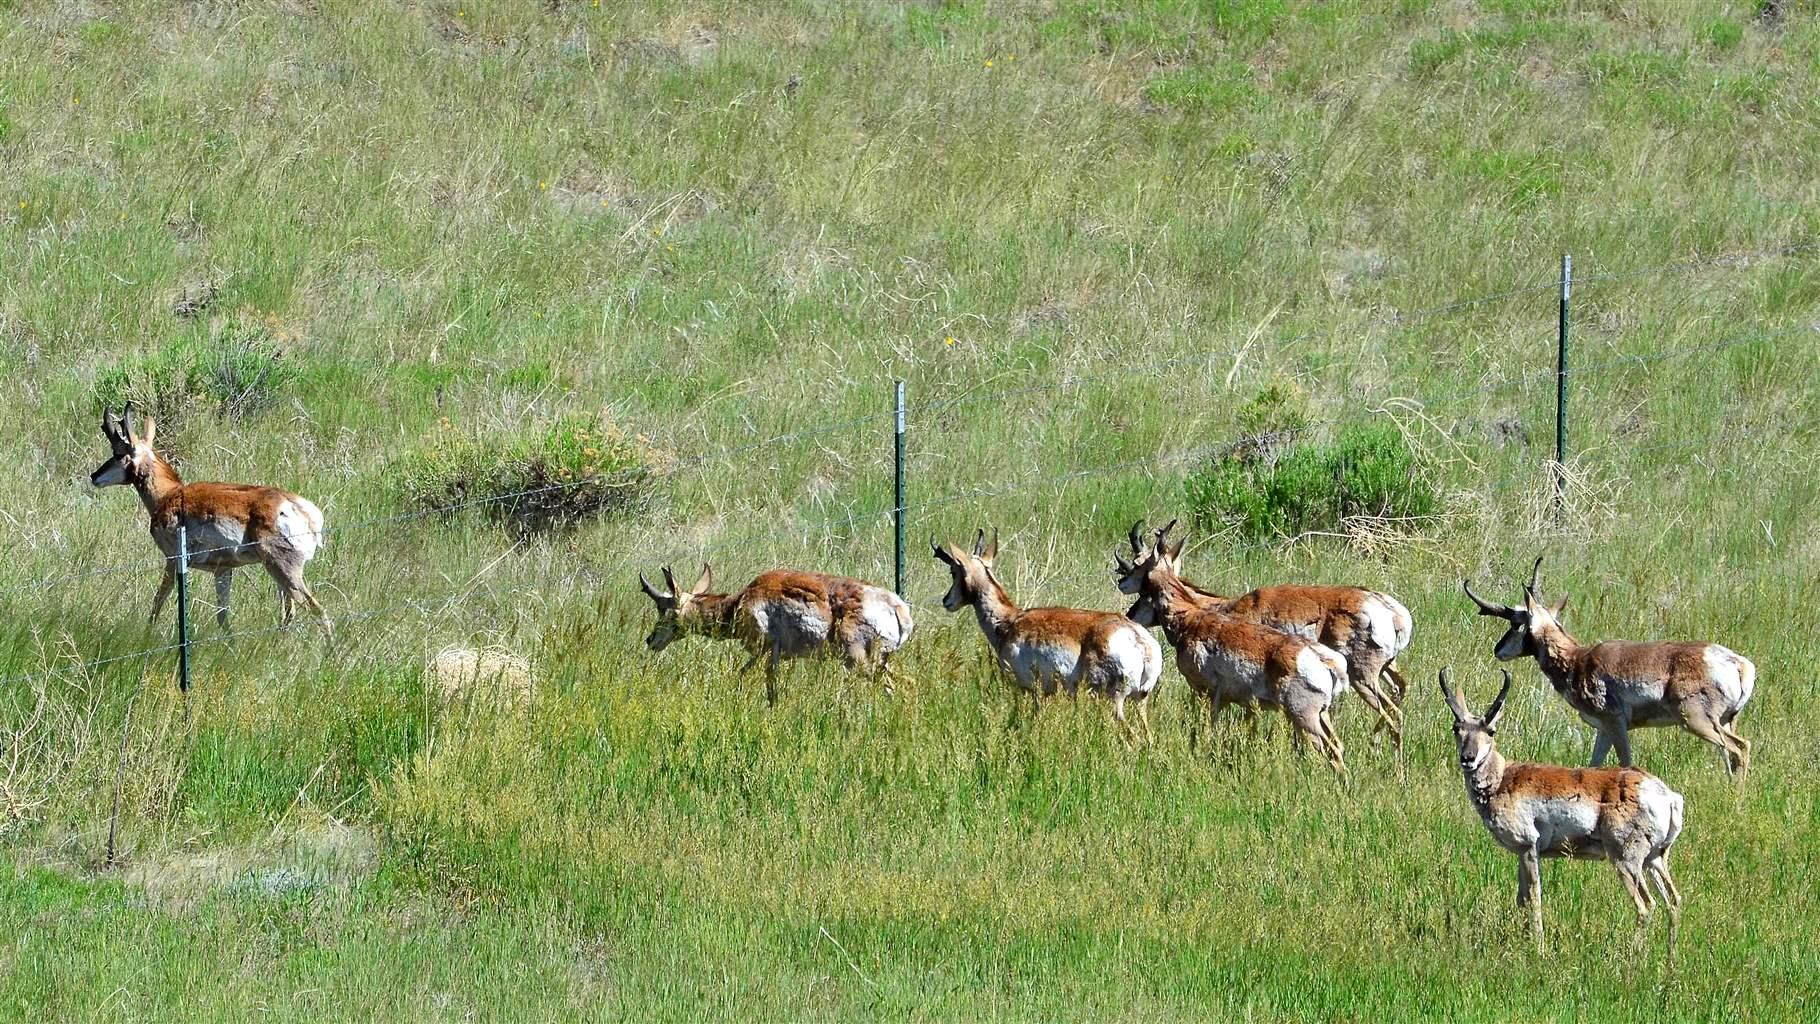 Pronghorn pass under a fence near La Veta, Colorado. The fencing is one of several human-made obstacles pronghorn face during their fall and spring migrations.